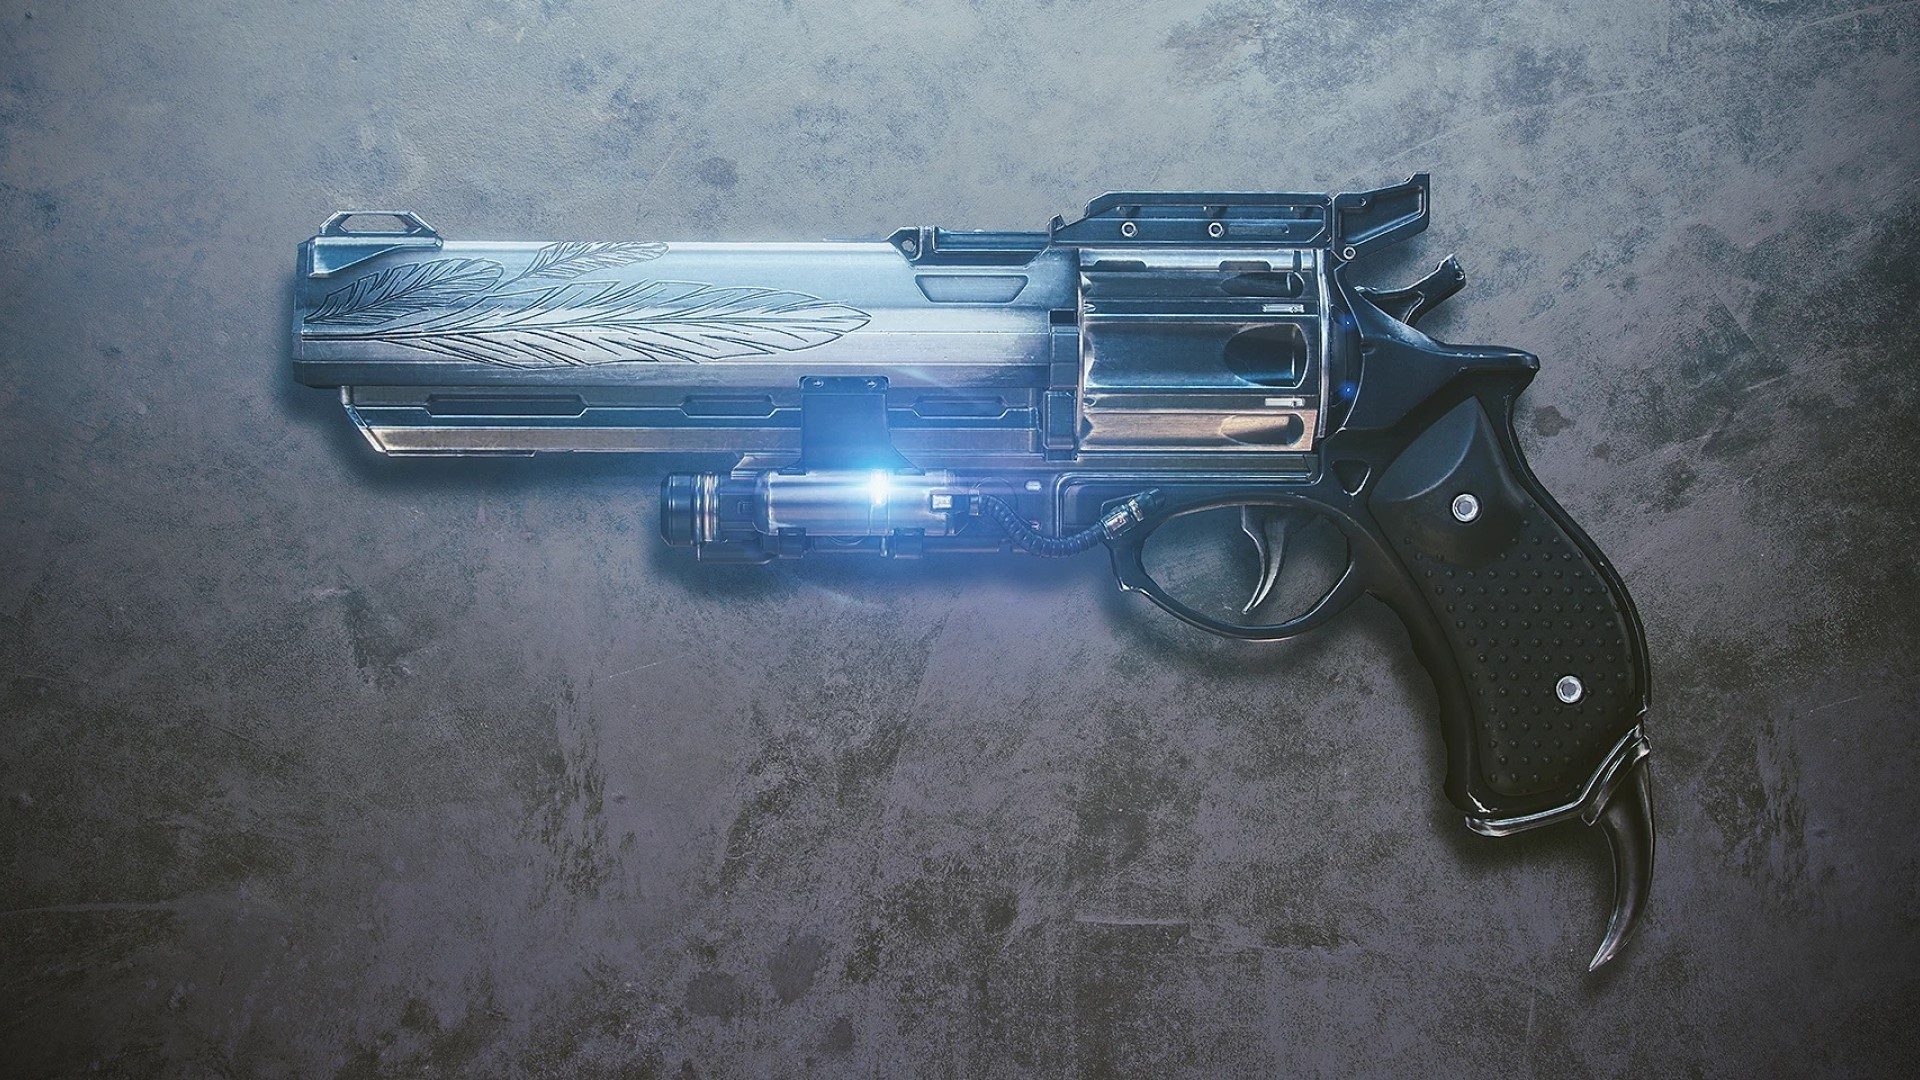 Destiny 2’s new hand cannon holster mod gives Hawkmoon infinite one-taps